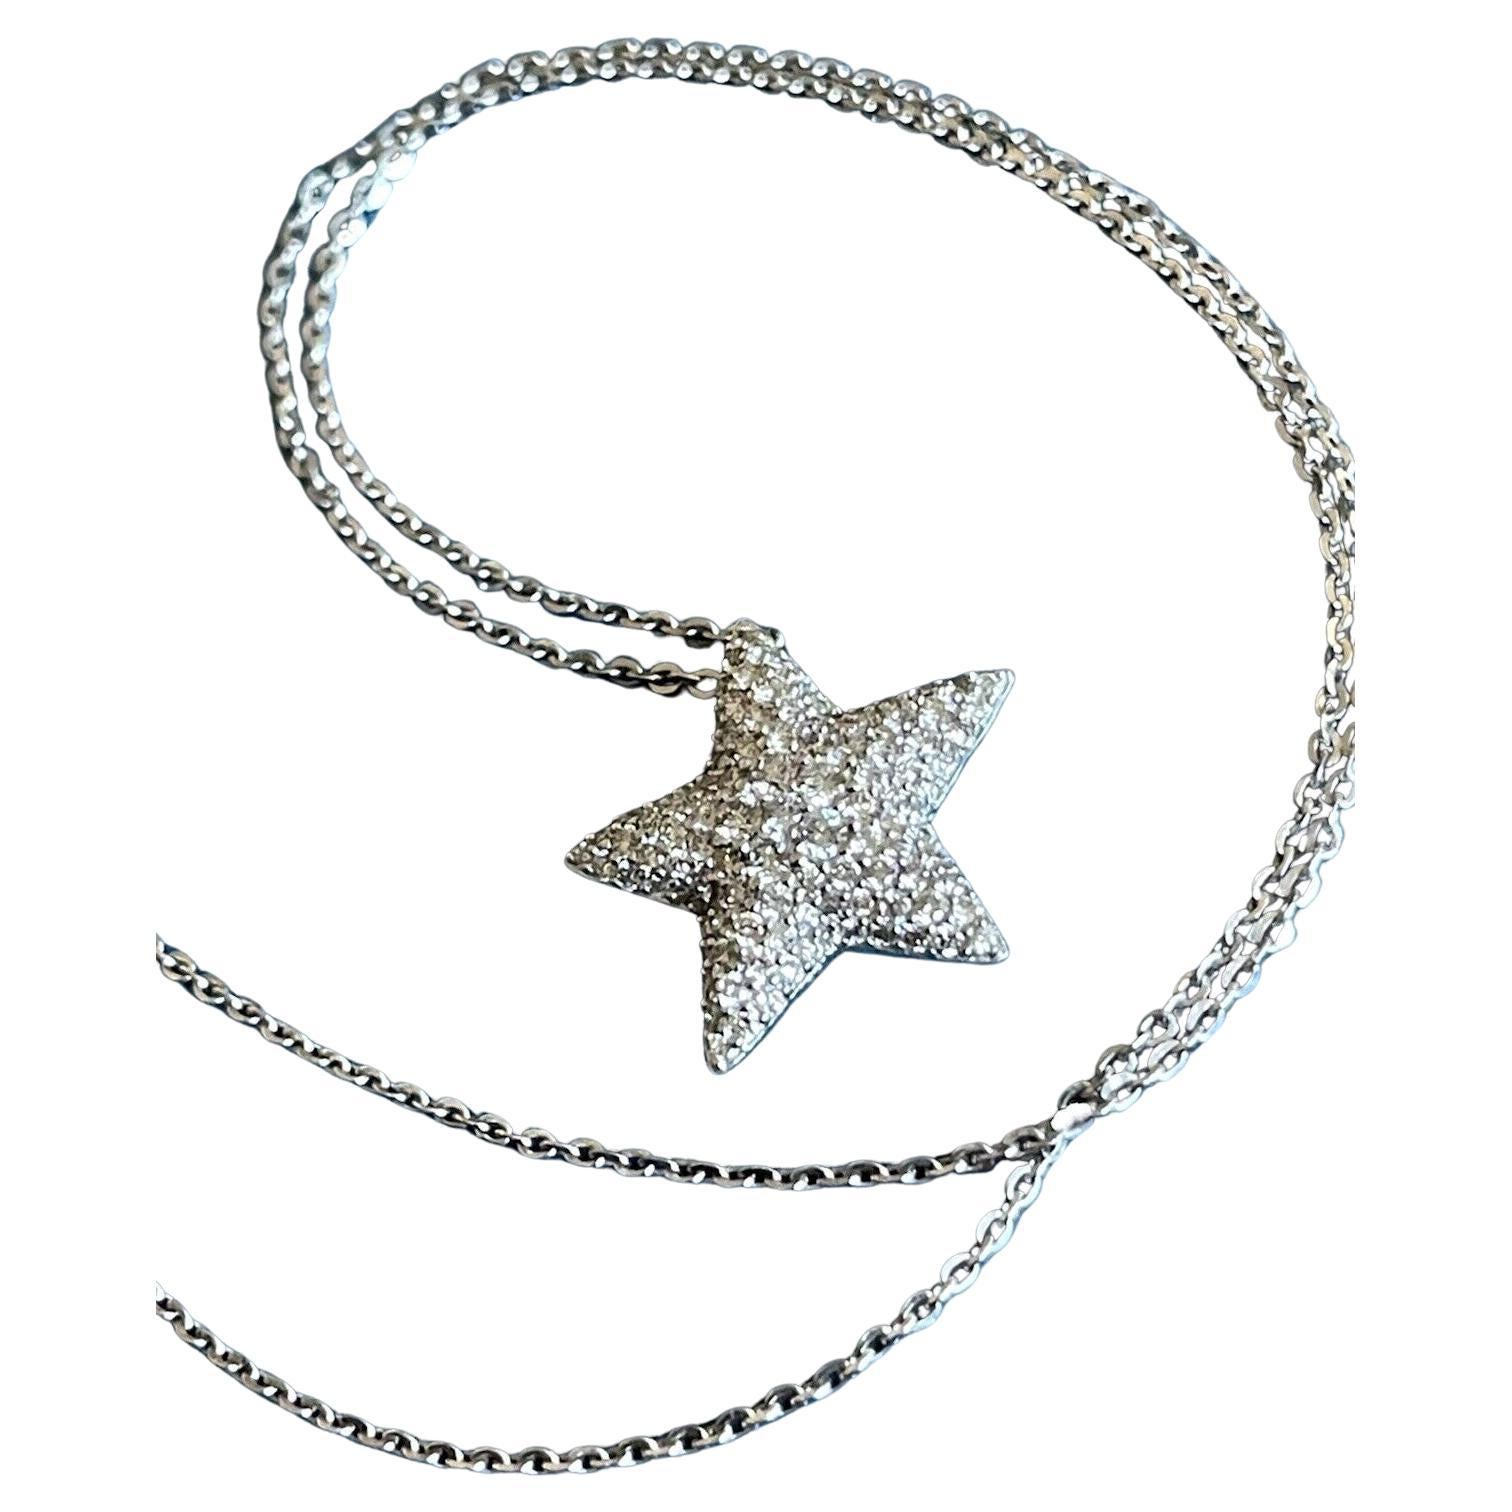 Cervin Blanc 18ct White Gold Diamond Necklace 1ct Star Pendant & Chain One Carat For Sale